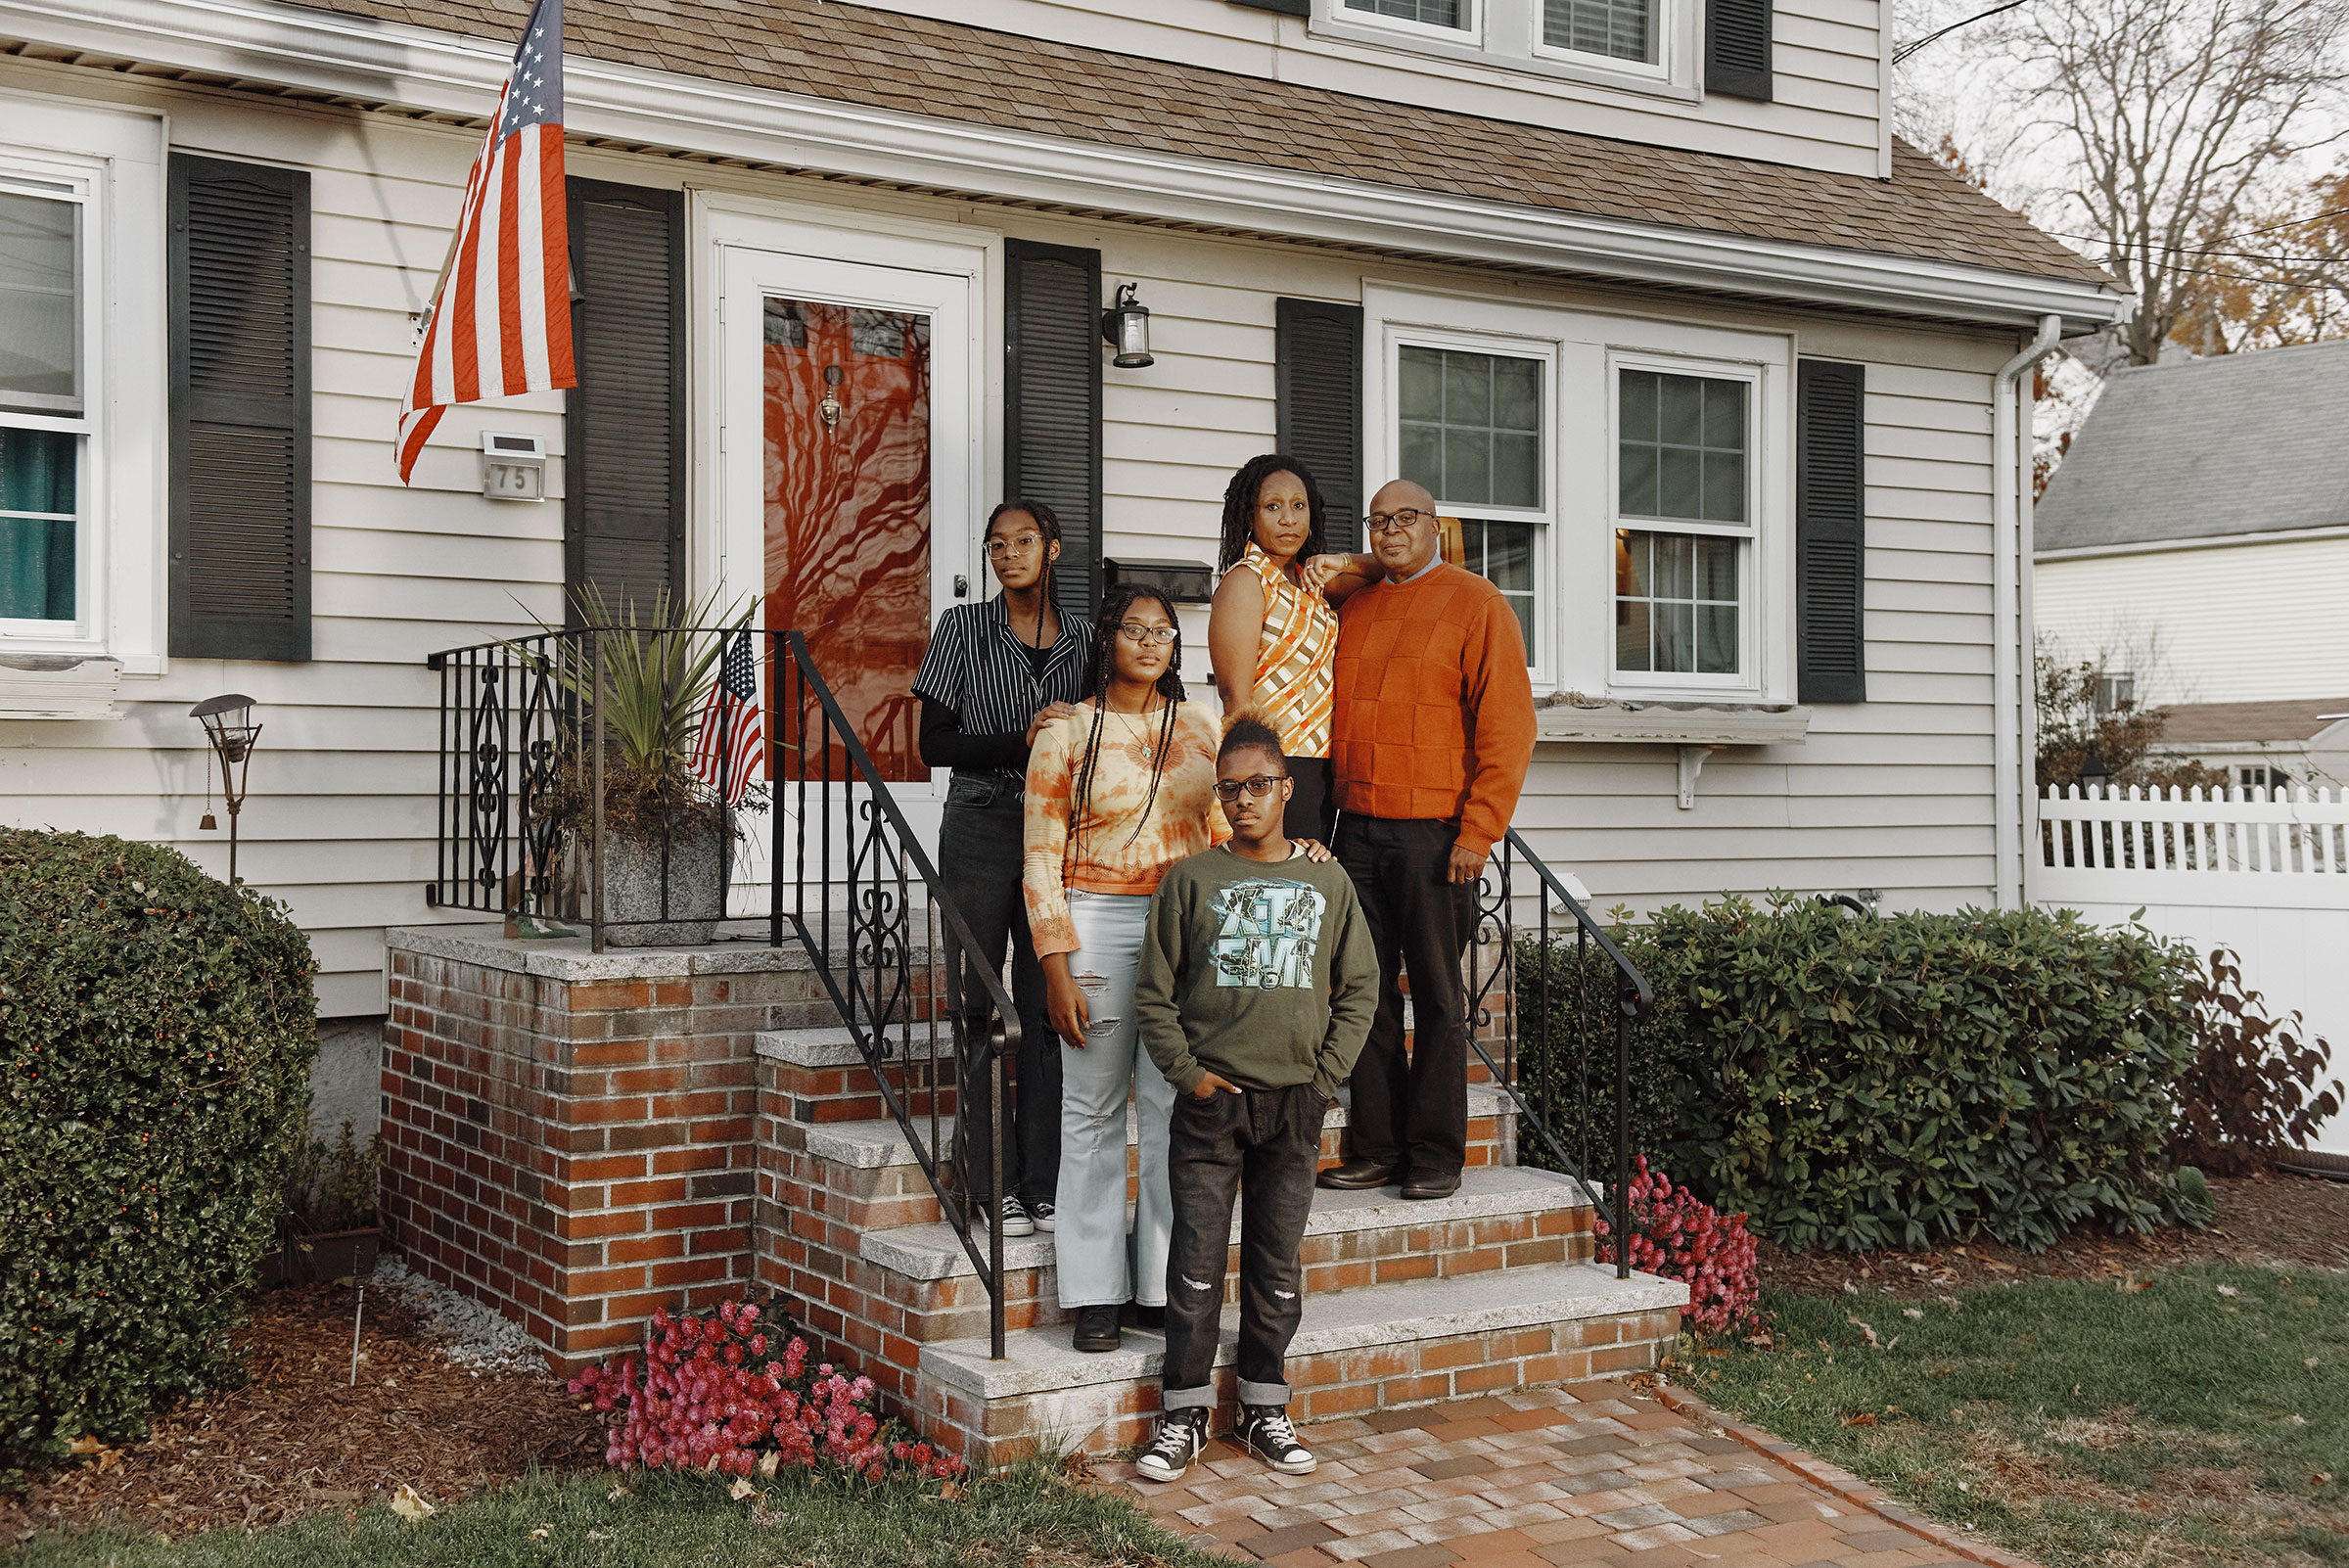 The Henry family outside their home in Malden on Nov. 18 (Tony Luong for TIME)